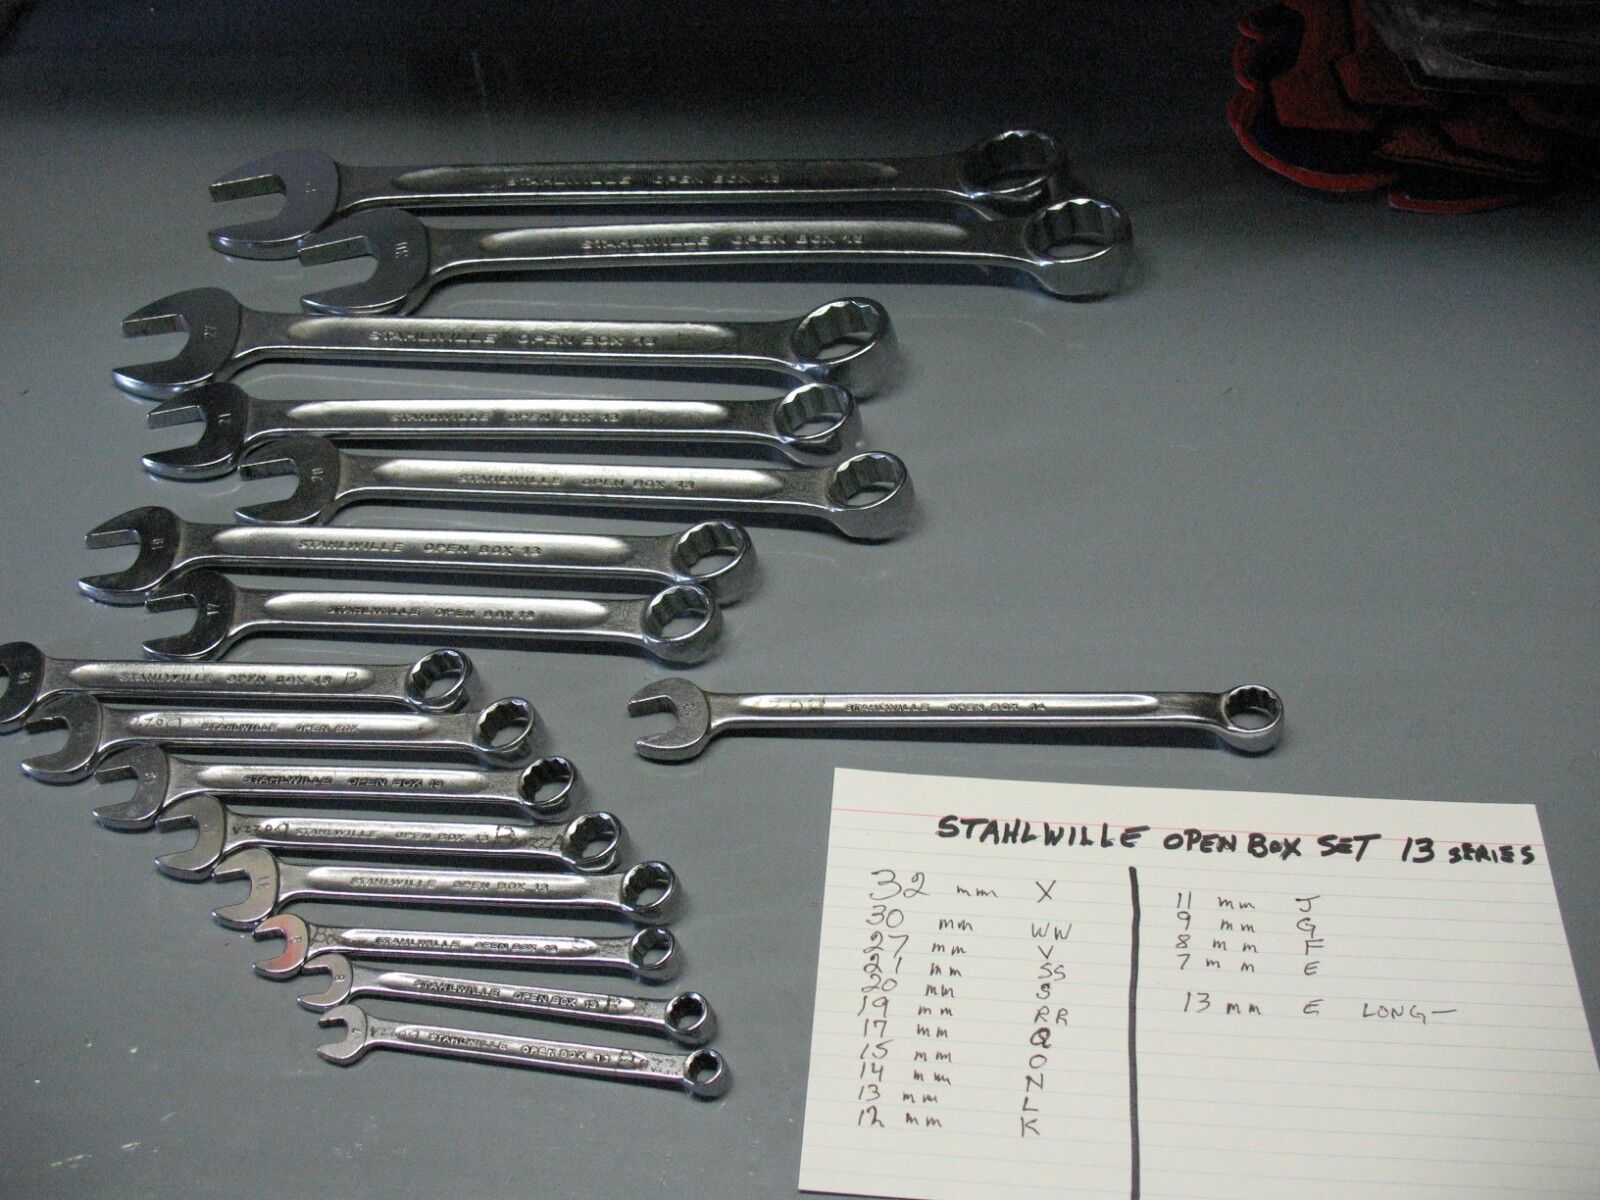 STAHLWILLE   OPEN BOX 13 SERIES  SPANNERS SET OF  16  VINTAGE GENUINE GERMANY